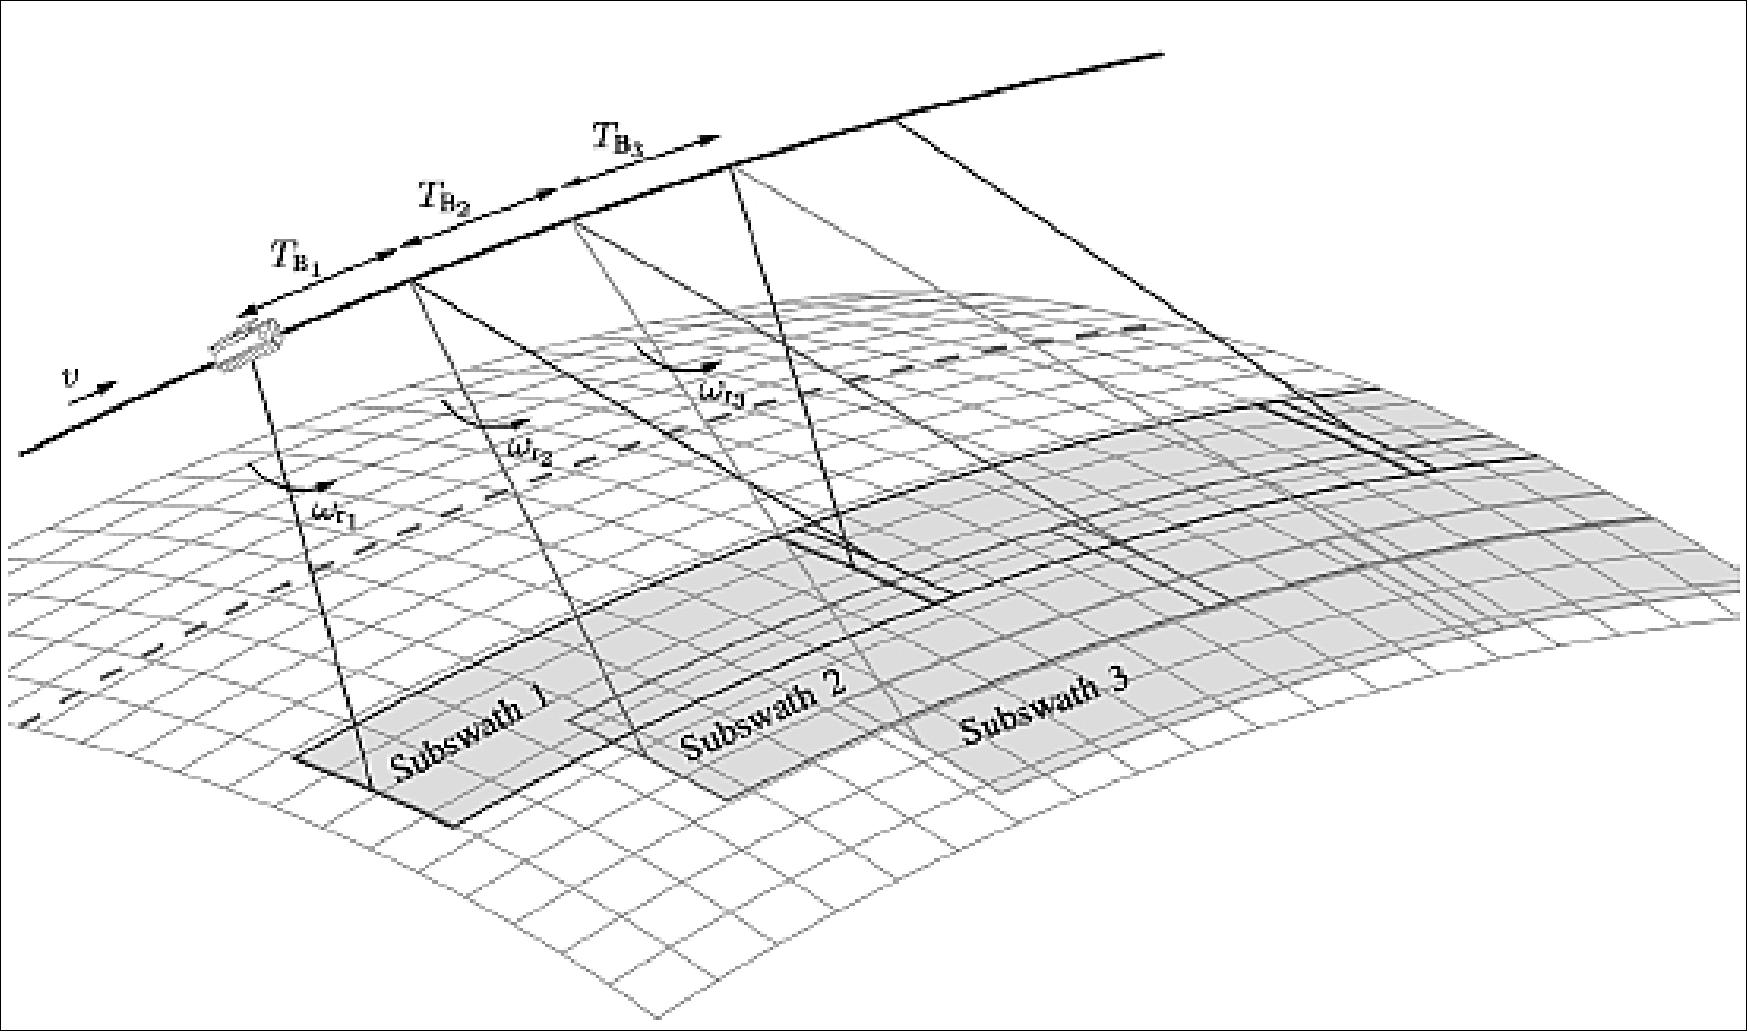 Sketch of the TOPSAR acquisition geometry